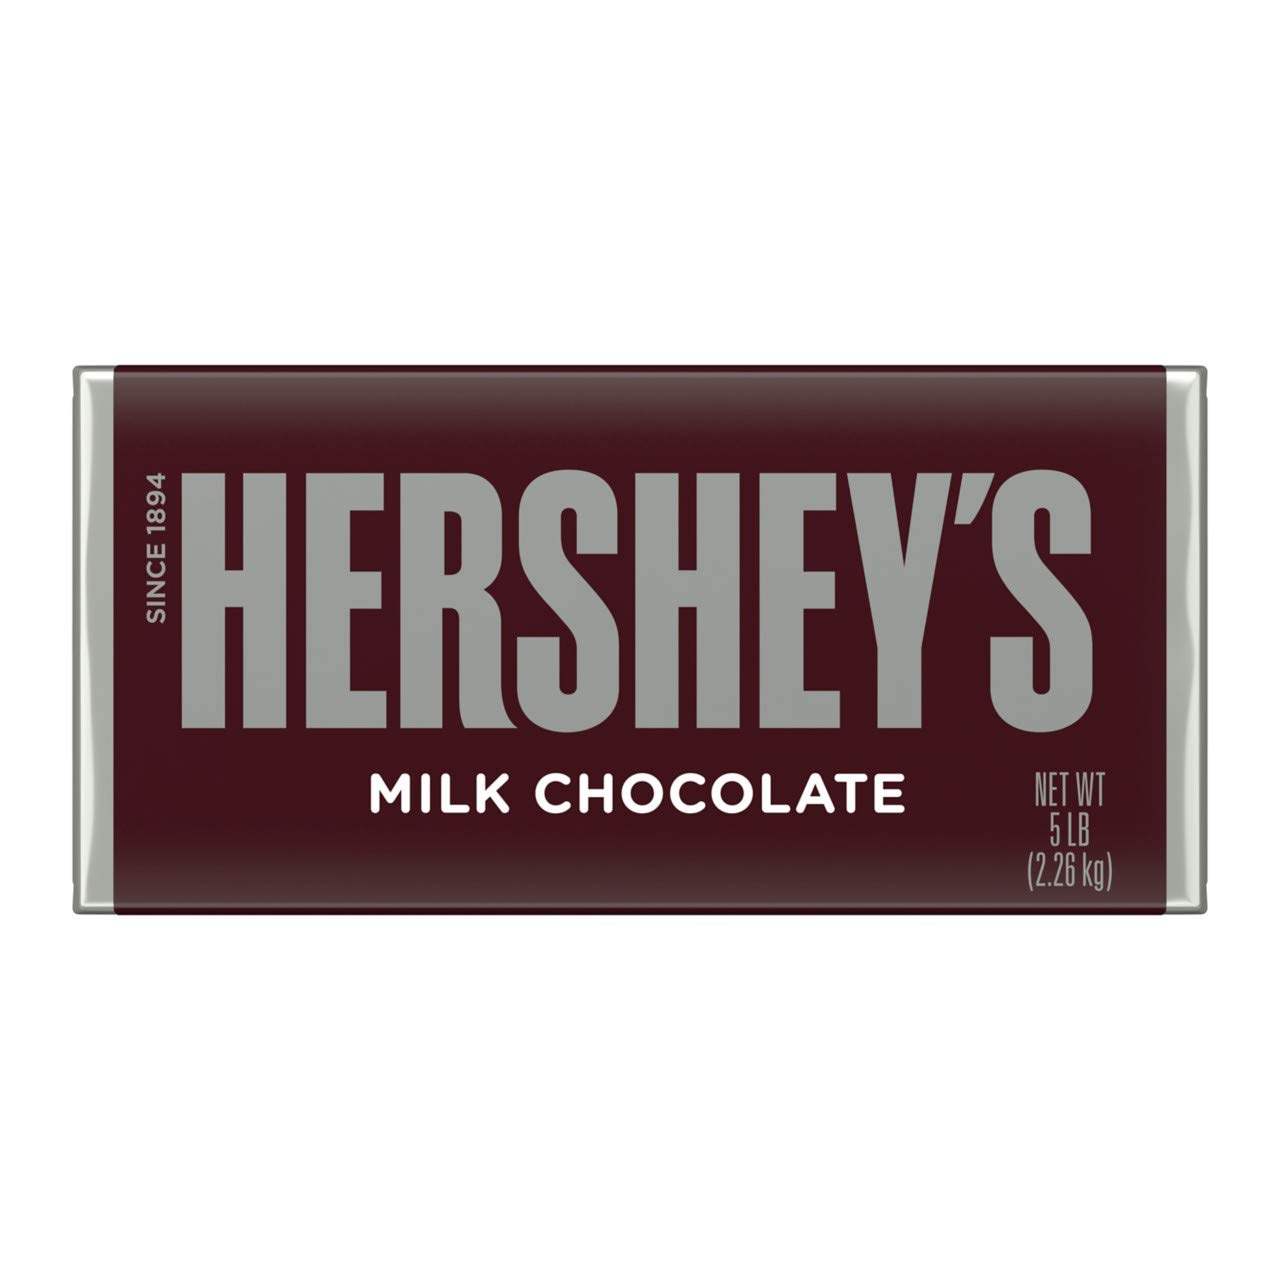 HERSHEY'S Valentines Day Giant Milk Chocolate Bar, Perfect as a Gift, 5 Pound Bar